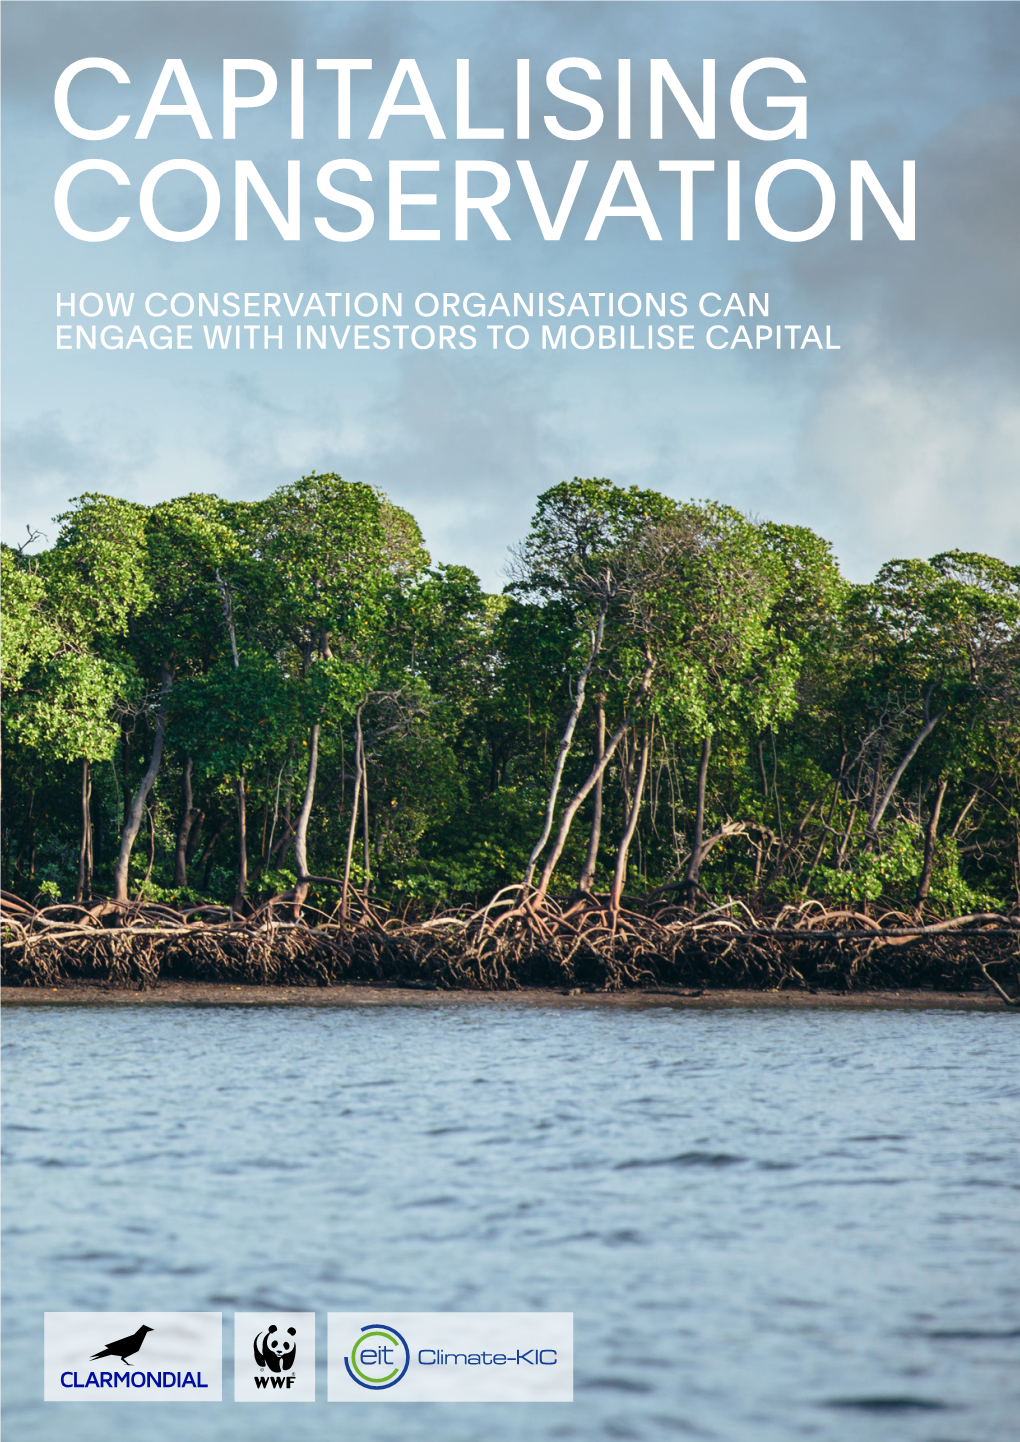 Capitalising Conservation How Conservation Organisations Can Engage with Investors to Mobilise Capital